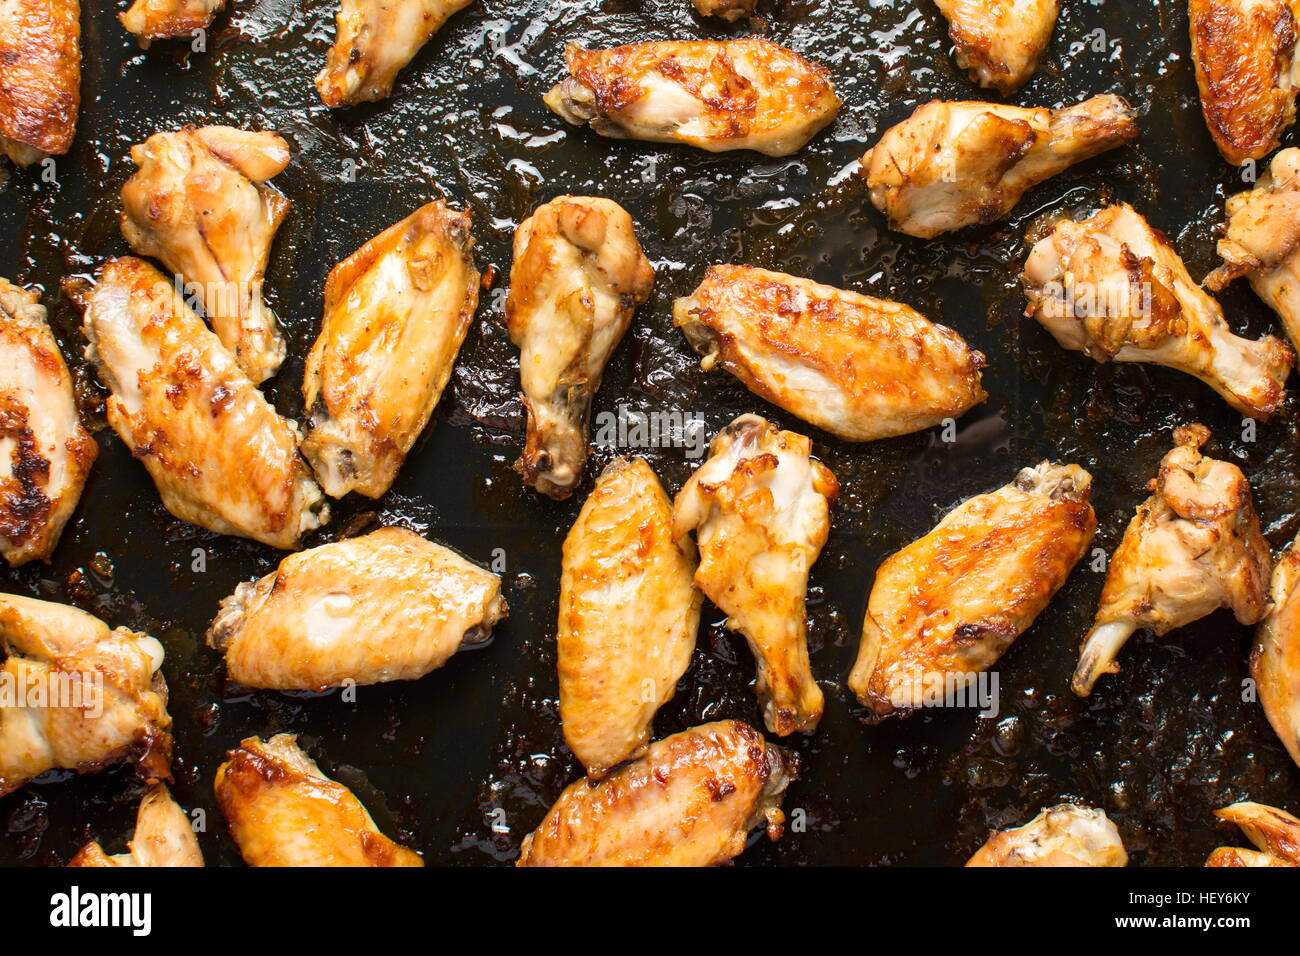 bbq chicken wings on a black baking plate Stock Photo